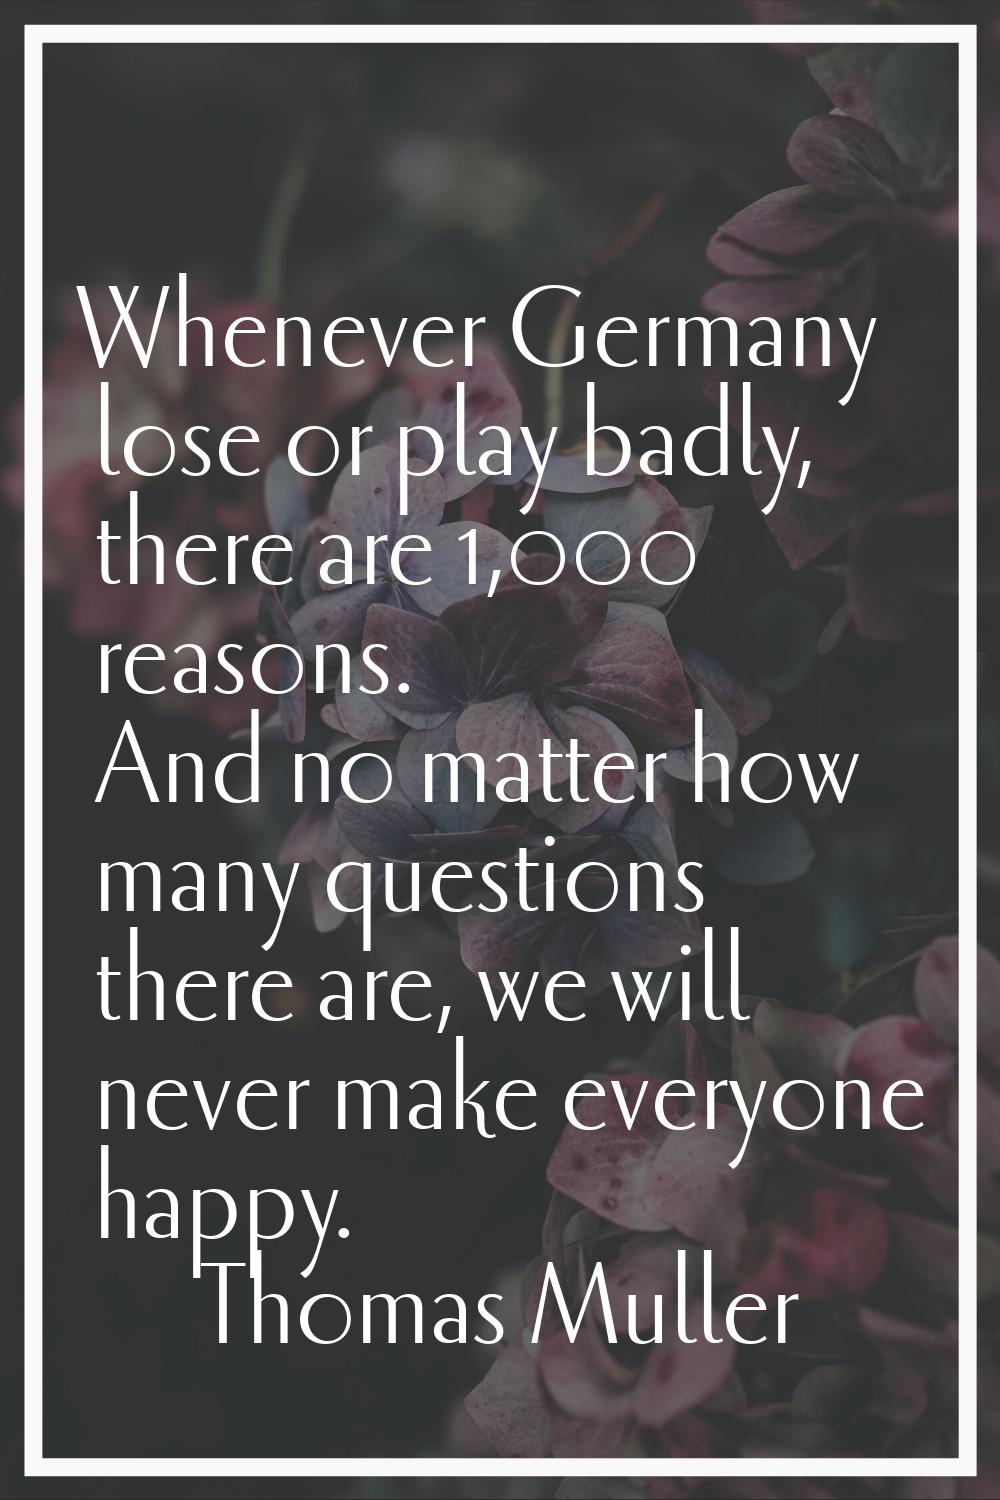 Whenever Germany lose or play badly, there are 1,000 reasons. And no matter how many questions ther